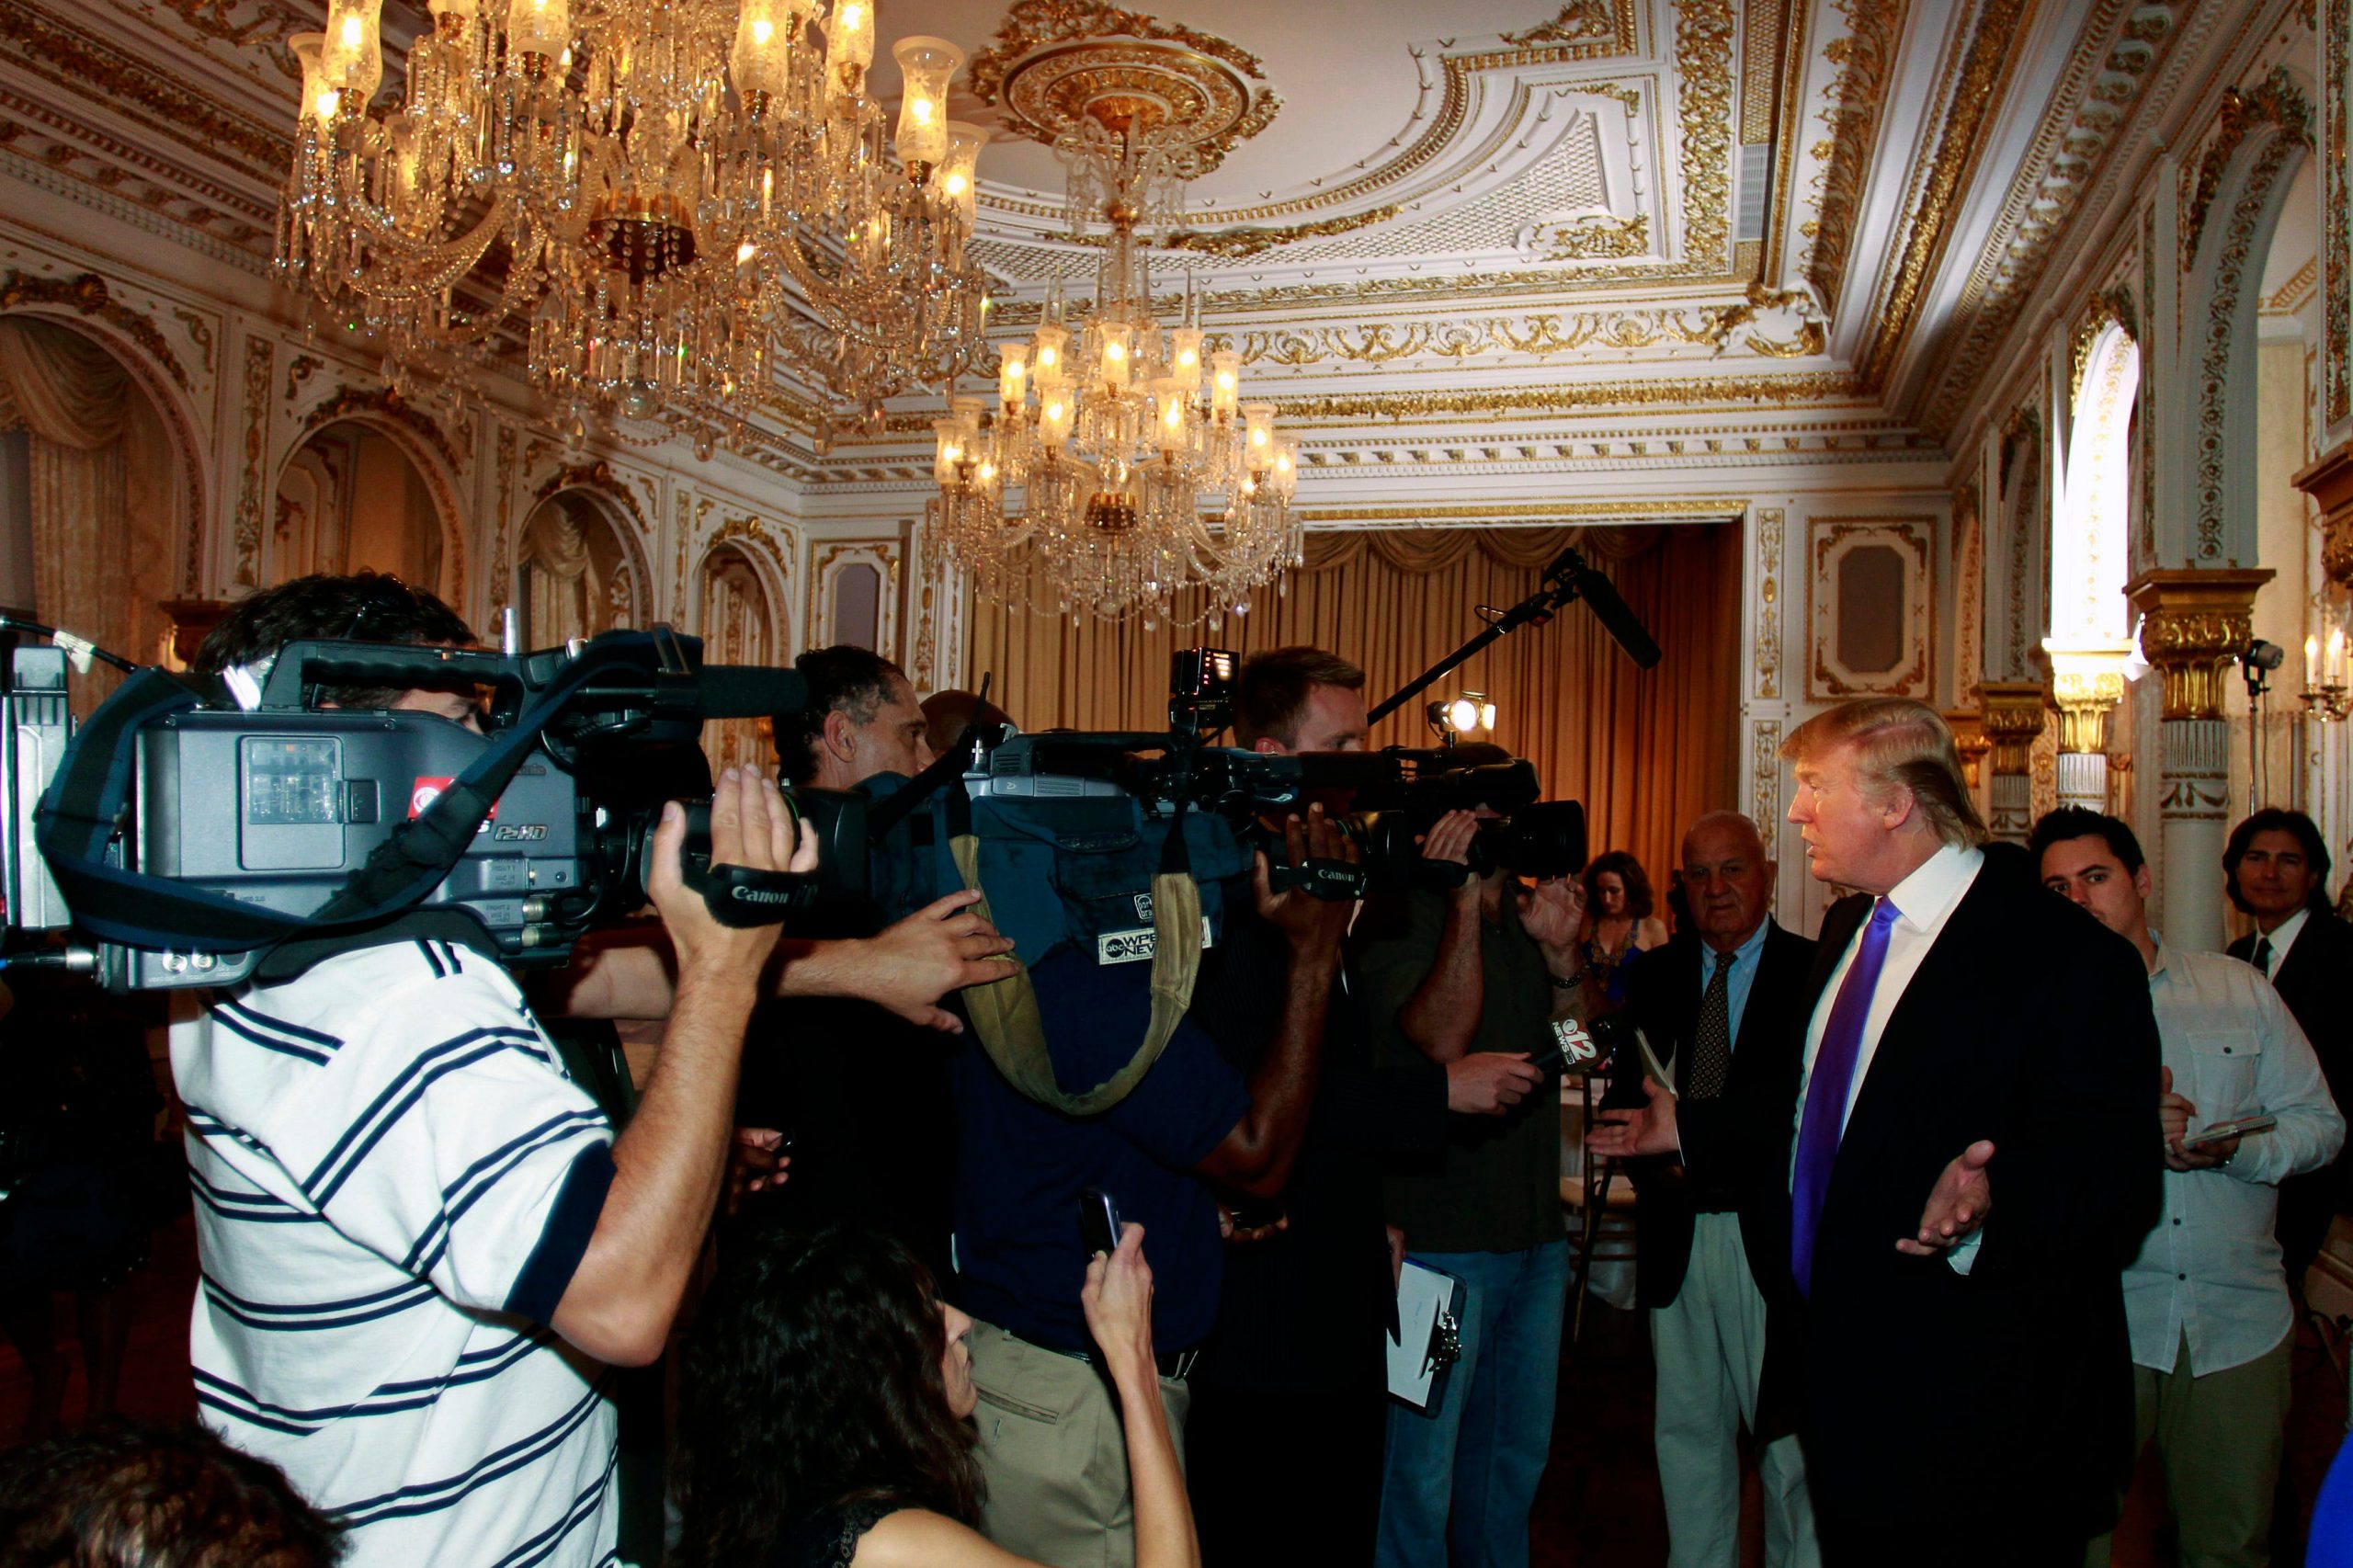 Trump flanked by cameras in Mar-a-Lago's gold-and-white ballroom in 2011